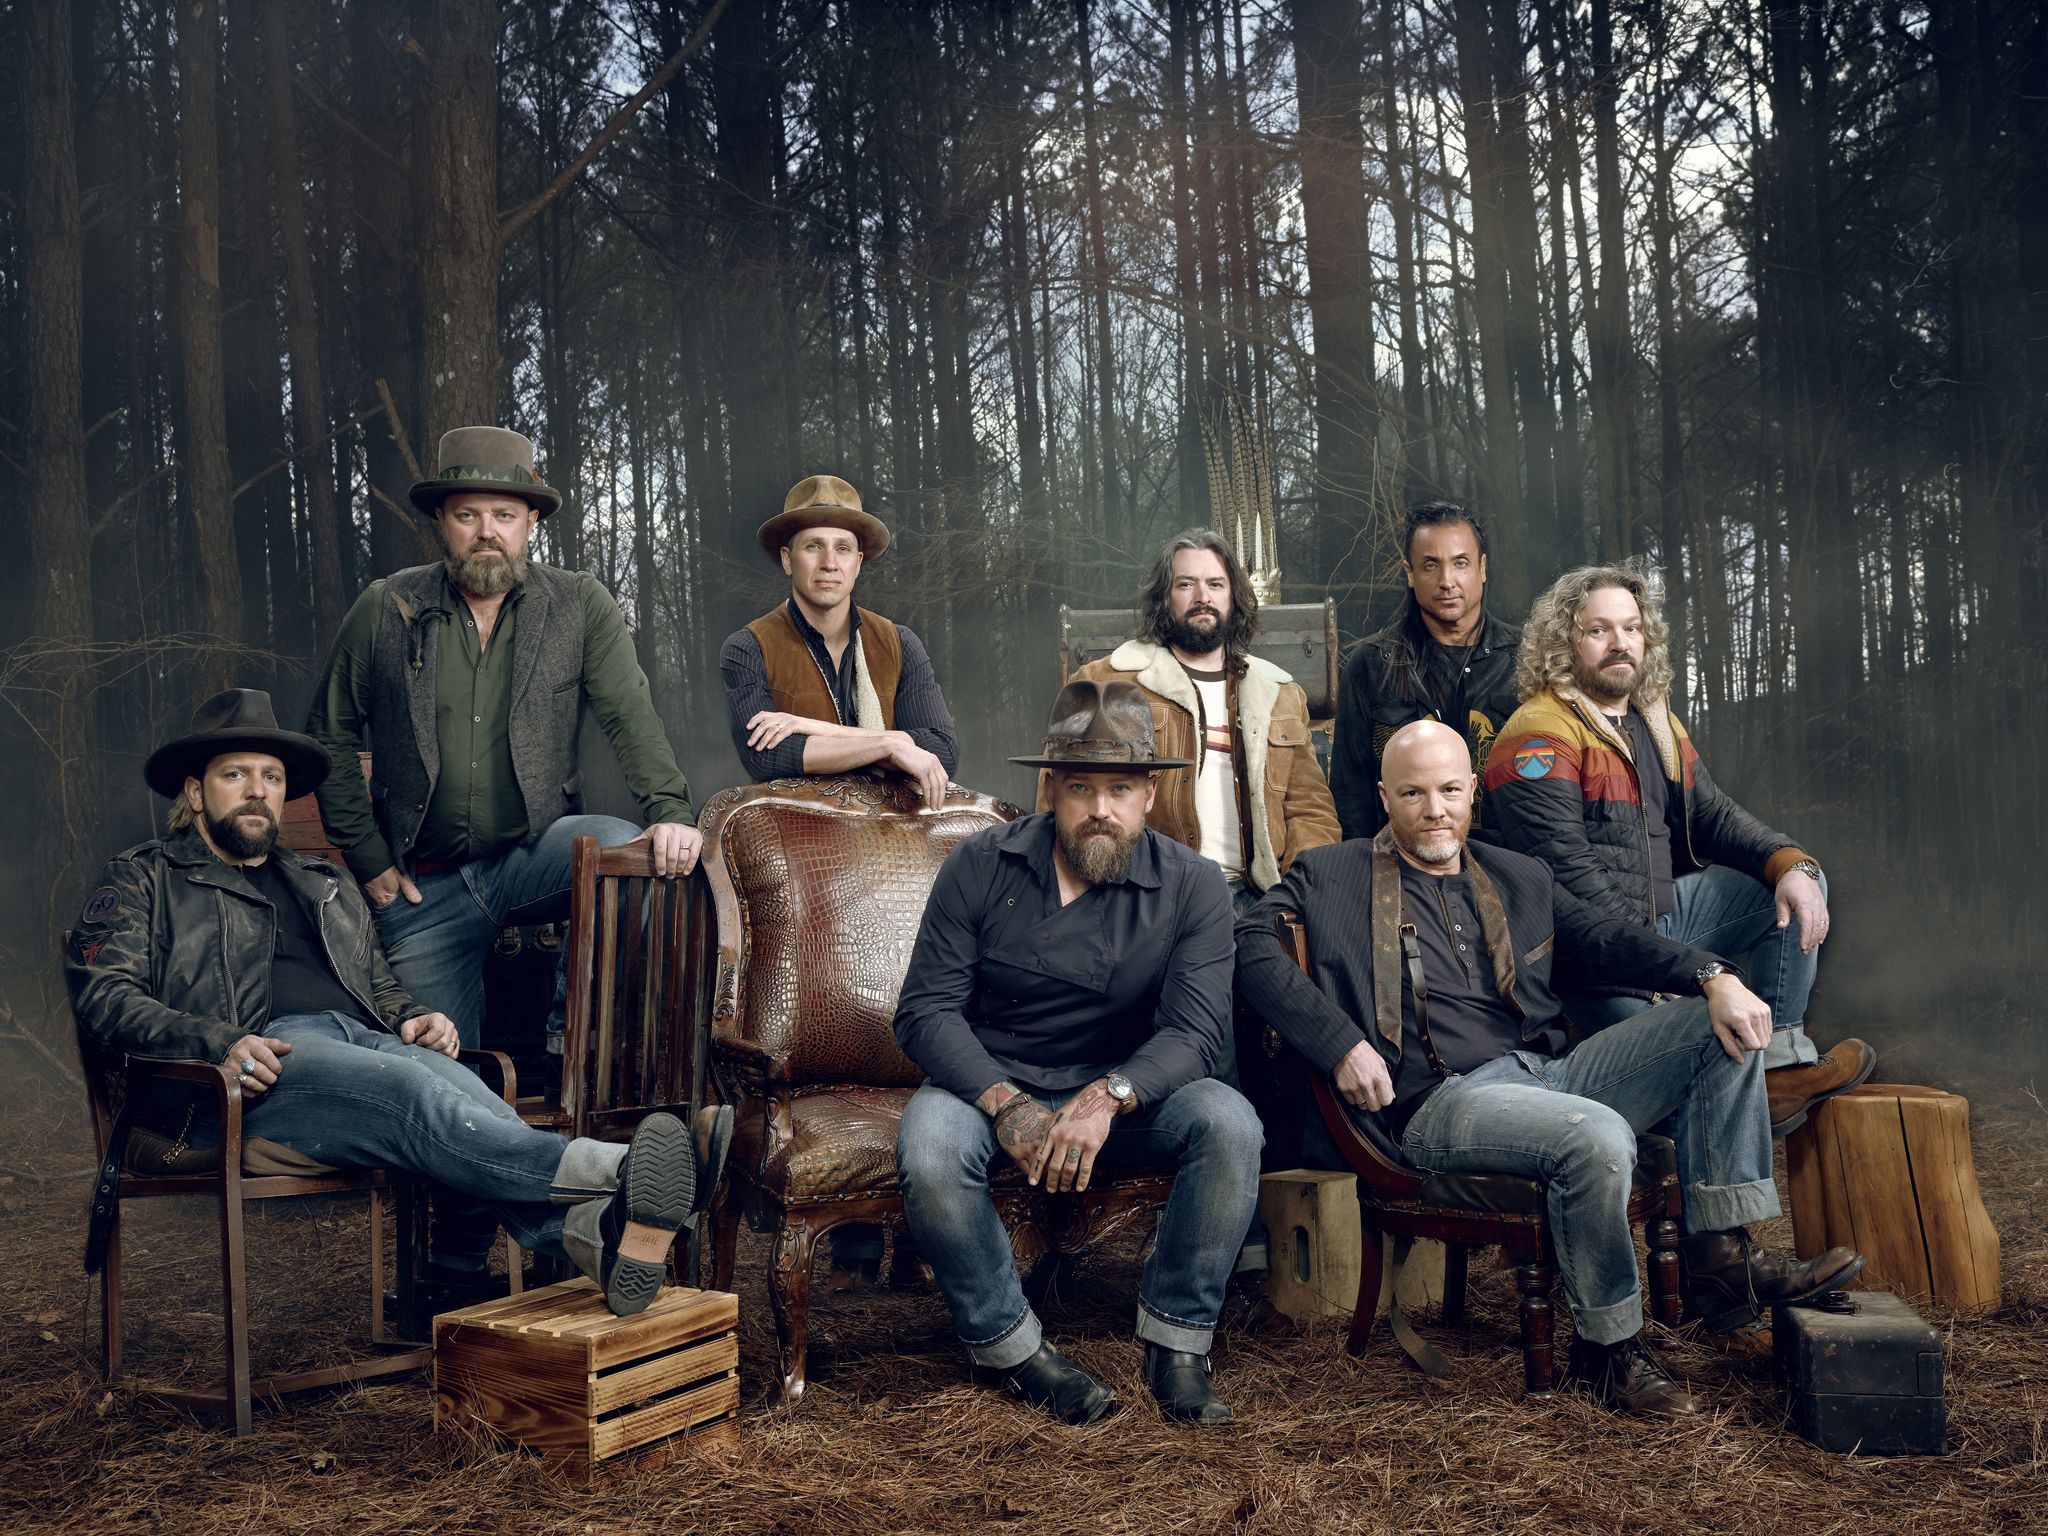 Zac Brown Band Announces First-Ever Livestream From Famed Southern Ground Studio